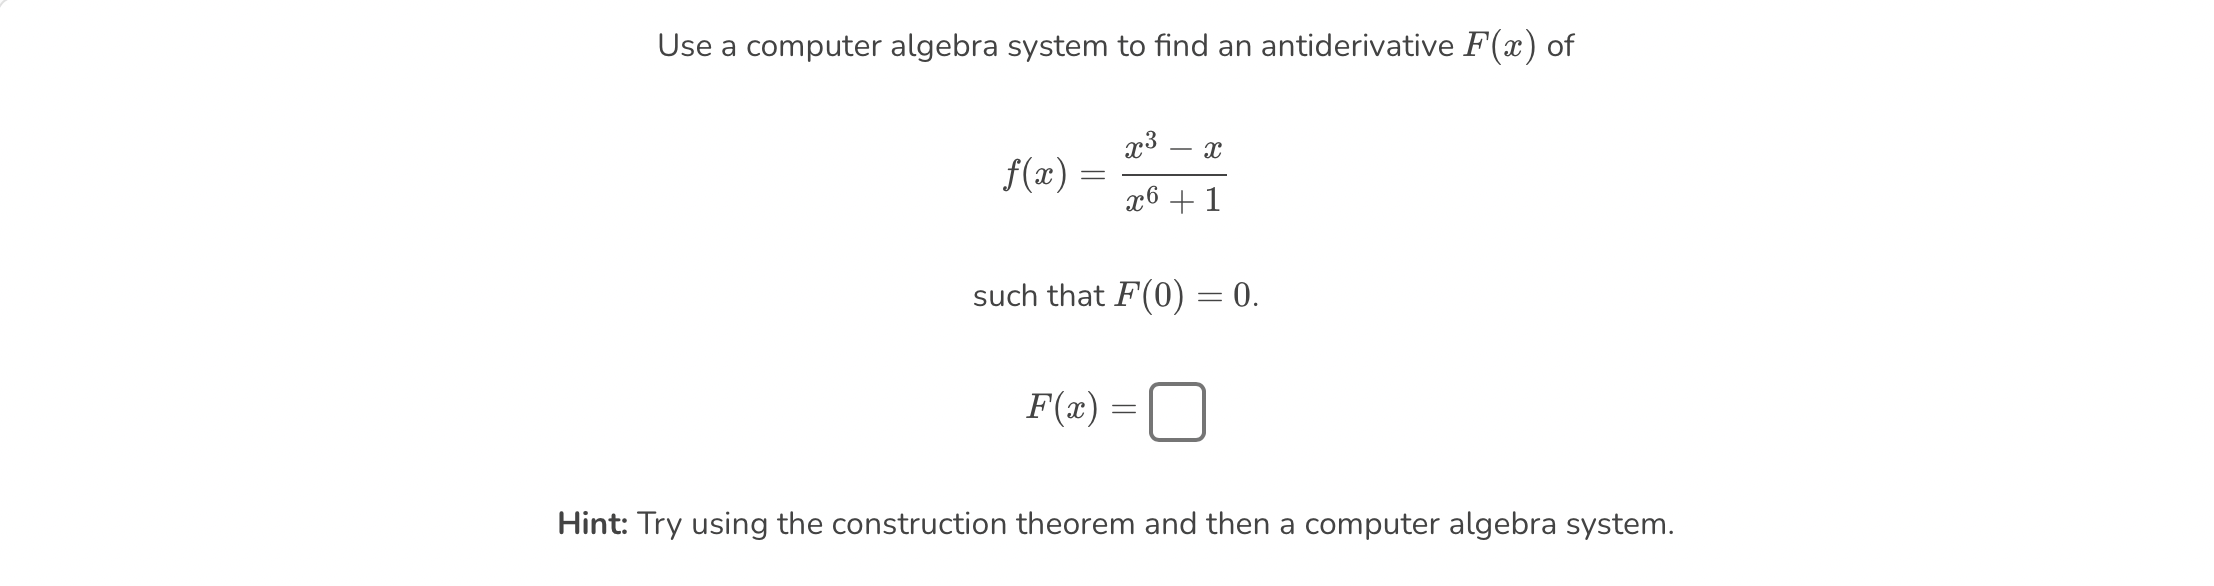 Use a computer algebra system to find an antiderivative \( F(x) \) of
\[
f(x)=\frac{x^{3}-x}{x^{6}+1}
\]
such that \( F(0)=0